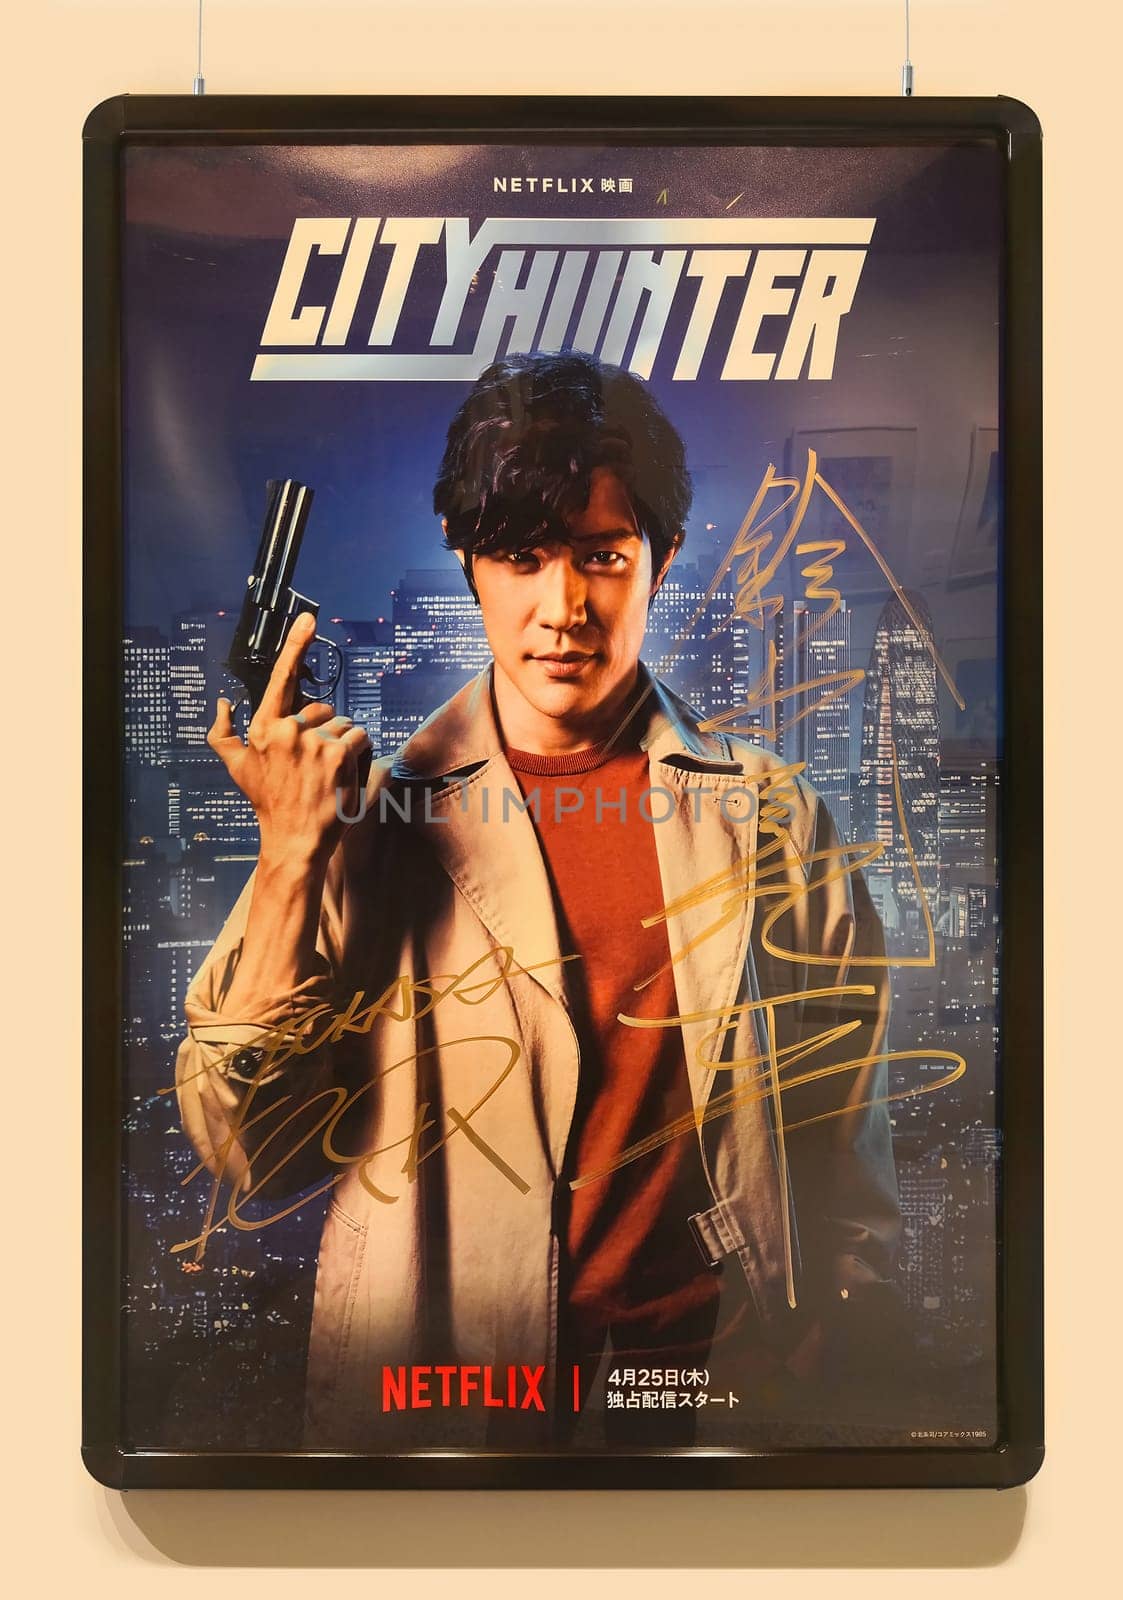 tokyo, japan - apr 25 2024: Netflix action movie poster of City Hunter or Nicky Larson depicting the actor Ryohei Suzuki holding a gun and signed by himself on right and by Tsukasa Hojo on left.